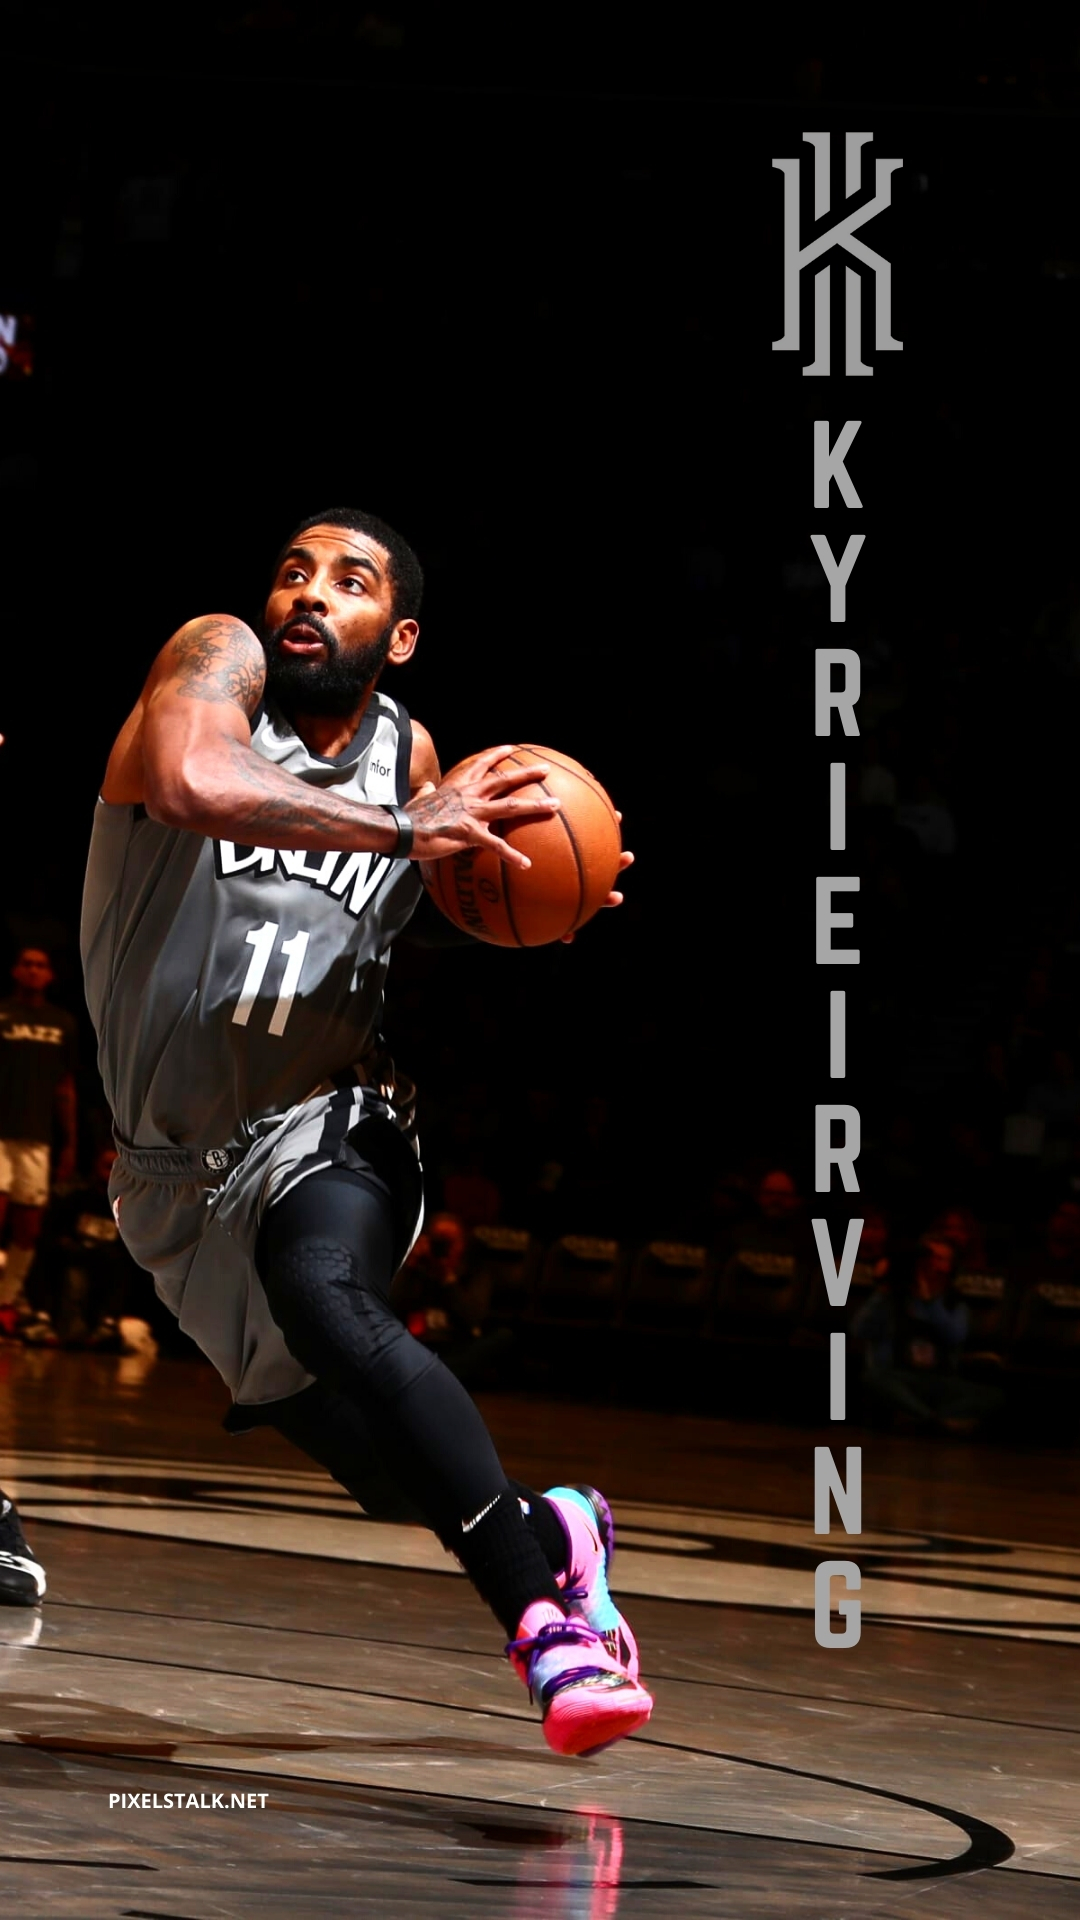 Kyrie Irving Phone Wallpapers  Wallpaper Cave